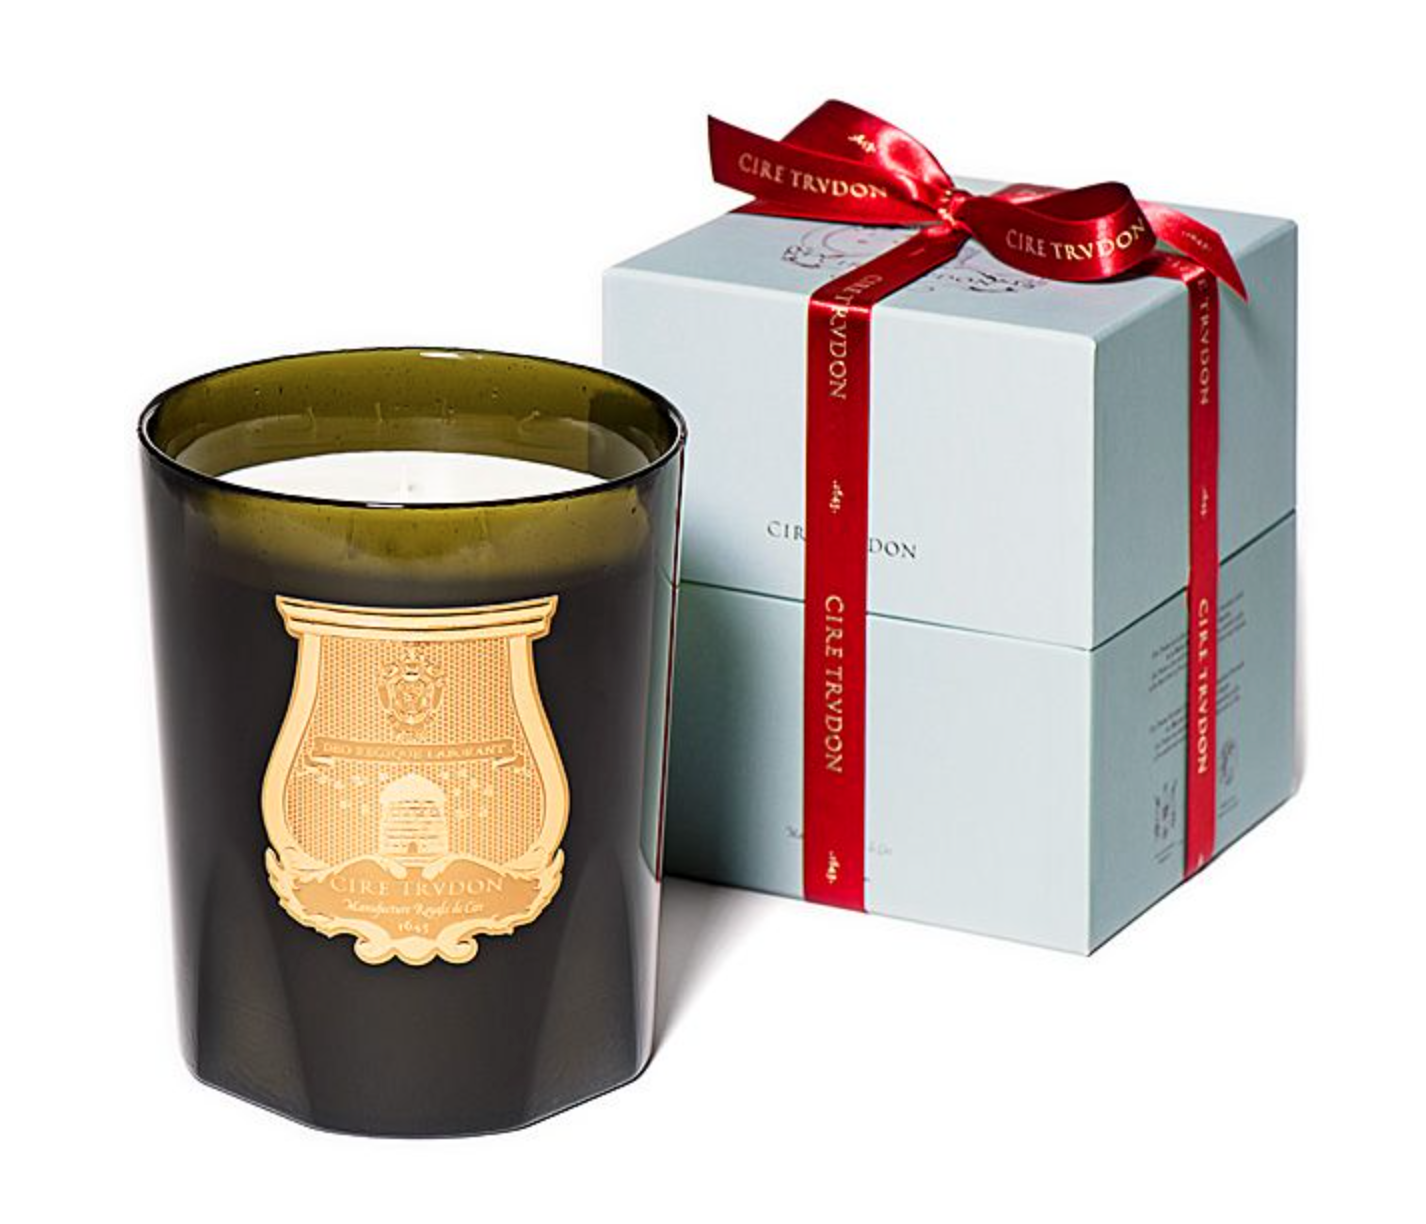 unique Christmas gifts for 2020 - Christmas home gifts - gifts for the home - Christmas gifts for her.png